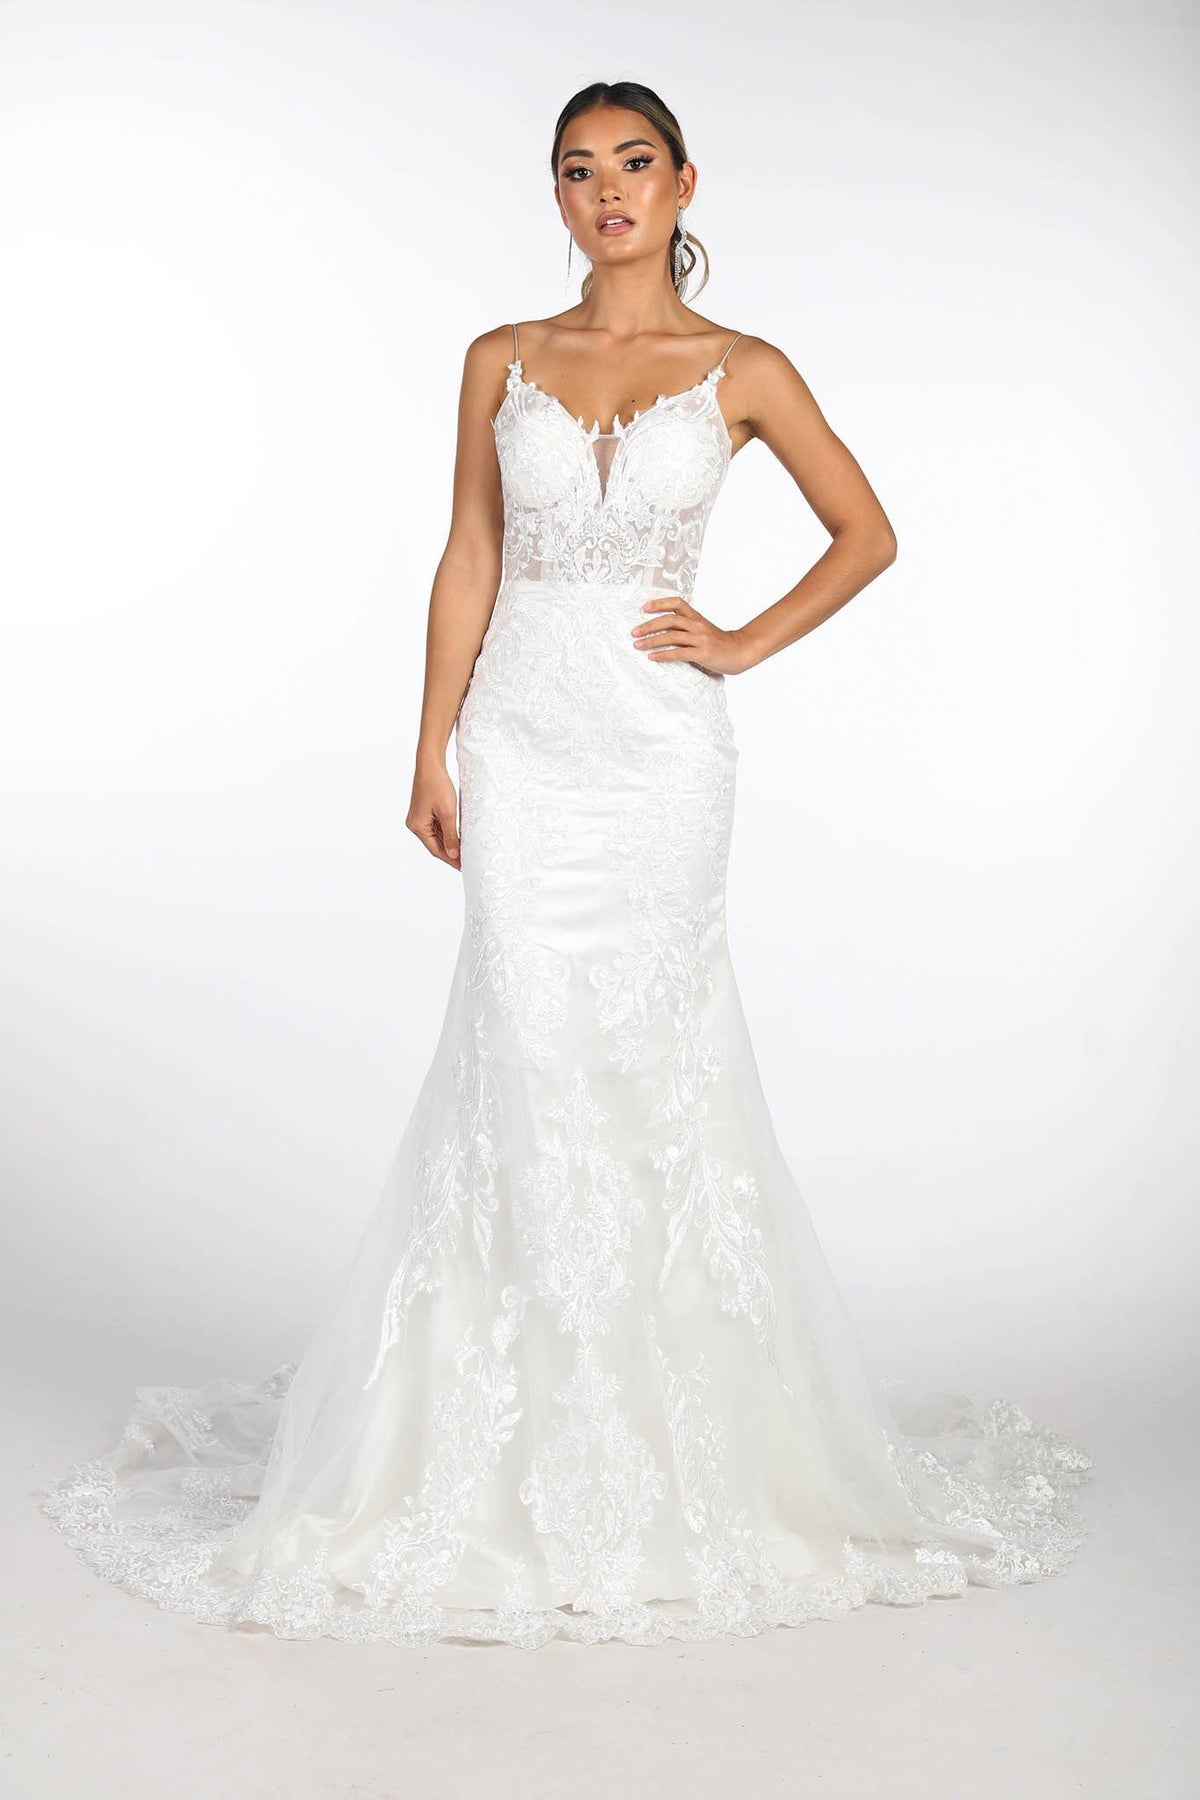 Ivory Coloured Full Length Lace Wedding Gown featuring Deep Illusion V-Neck, Thin Shoulder Straps, Lace Motifs on Tulle over Chantilly Lace from the Bodice Trailing Down on the Dramatic Scalloped Train